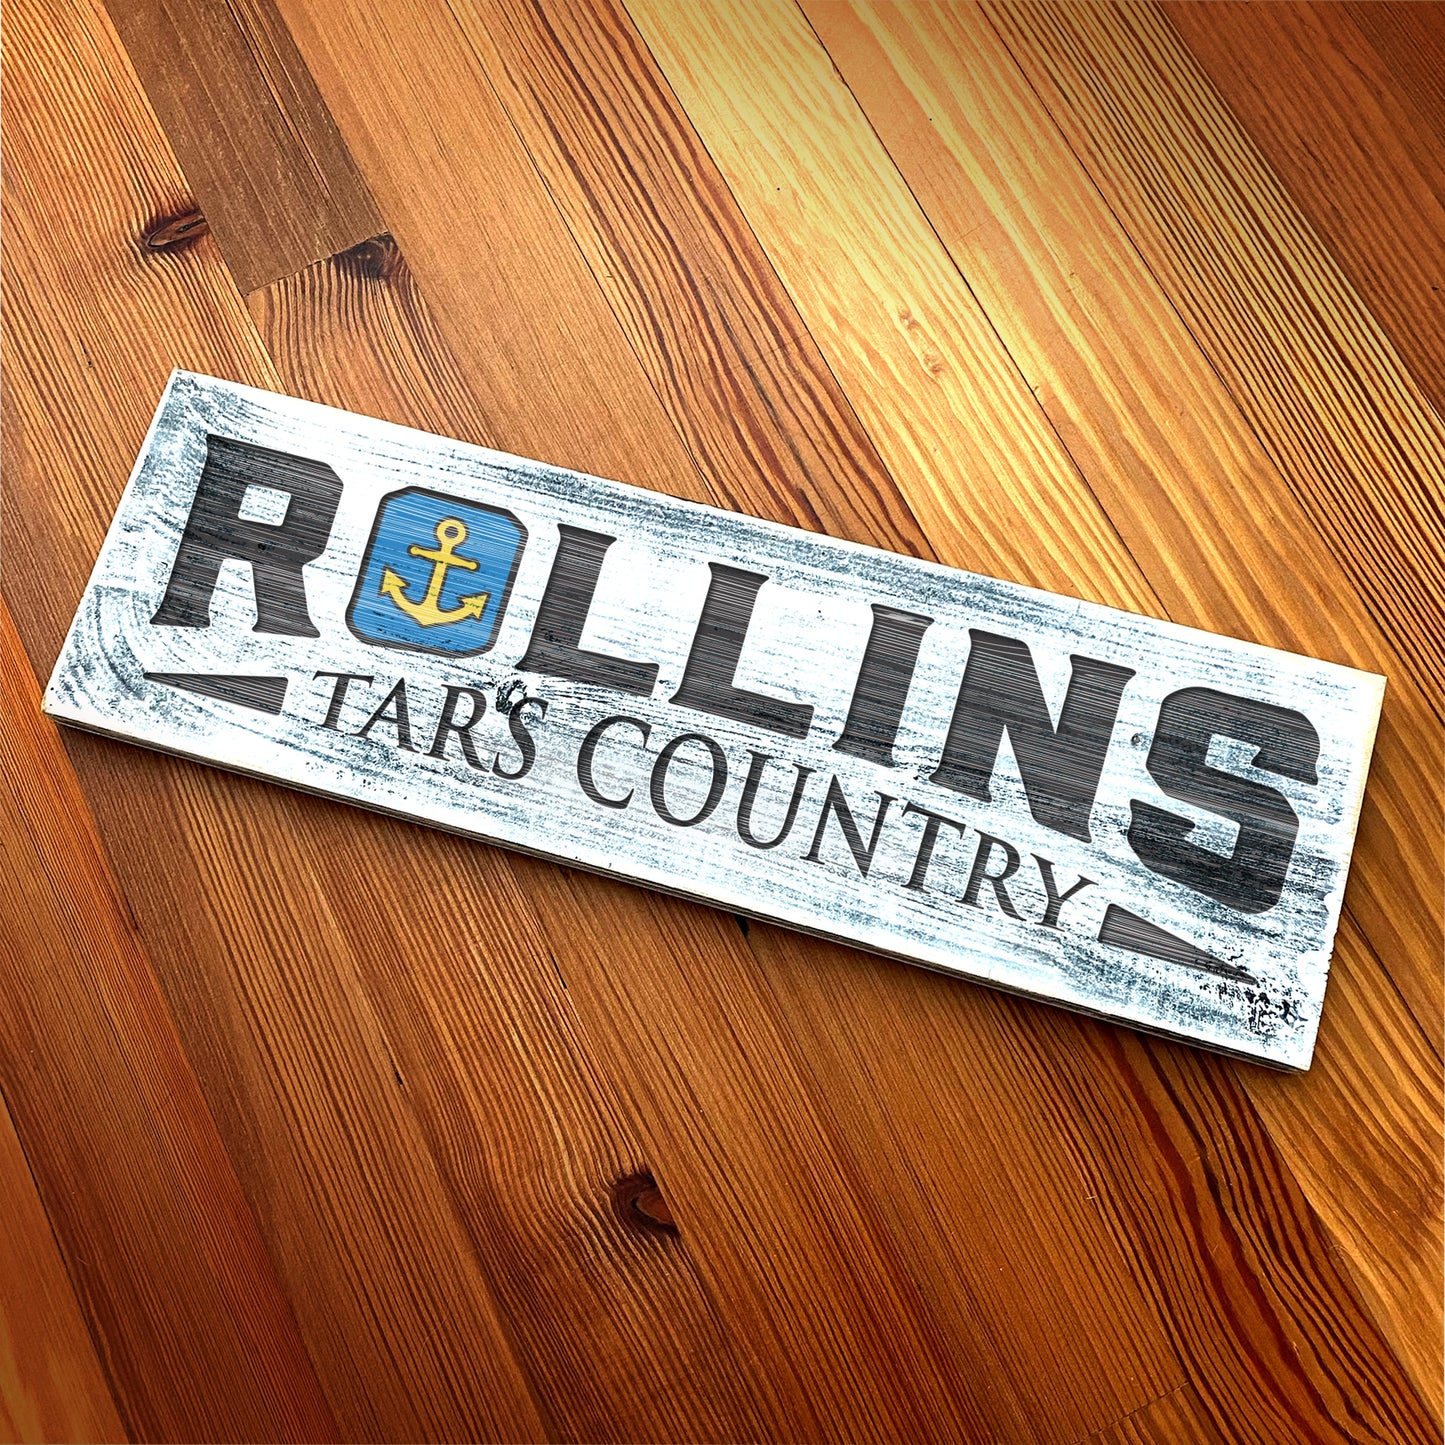 Rollins College - Handcrafted Artisan Wood Sign